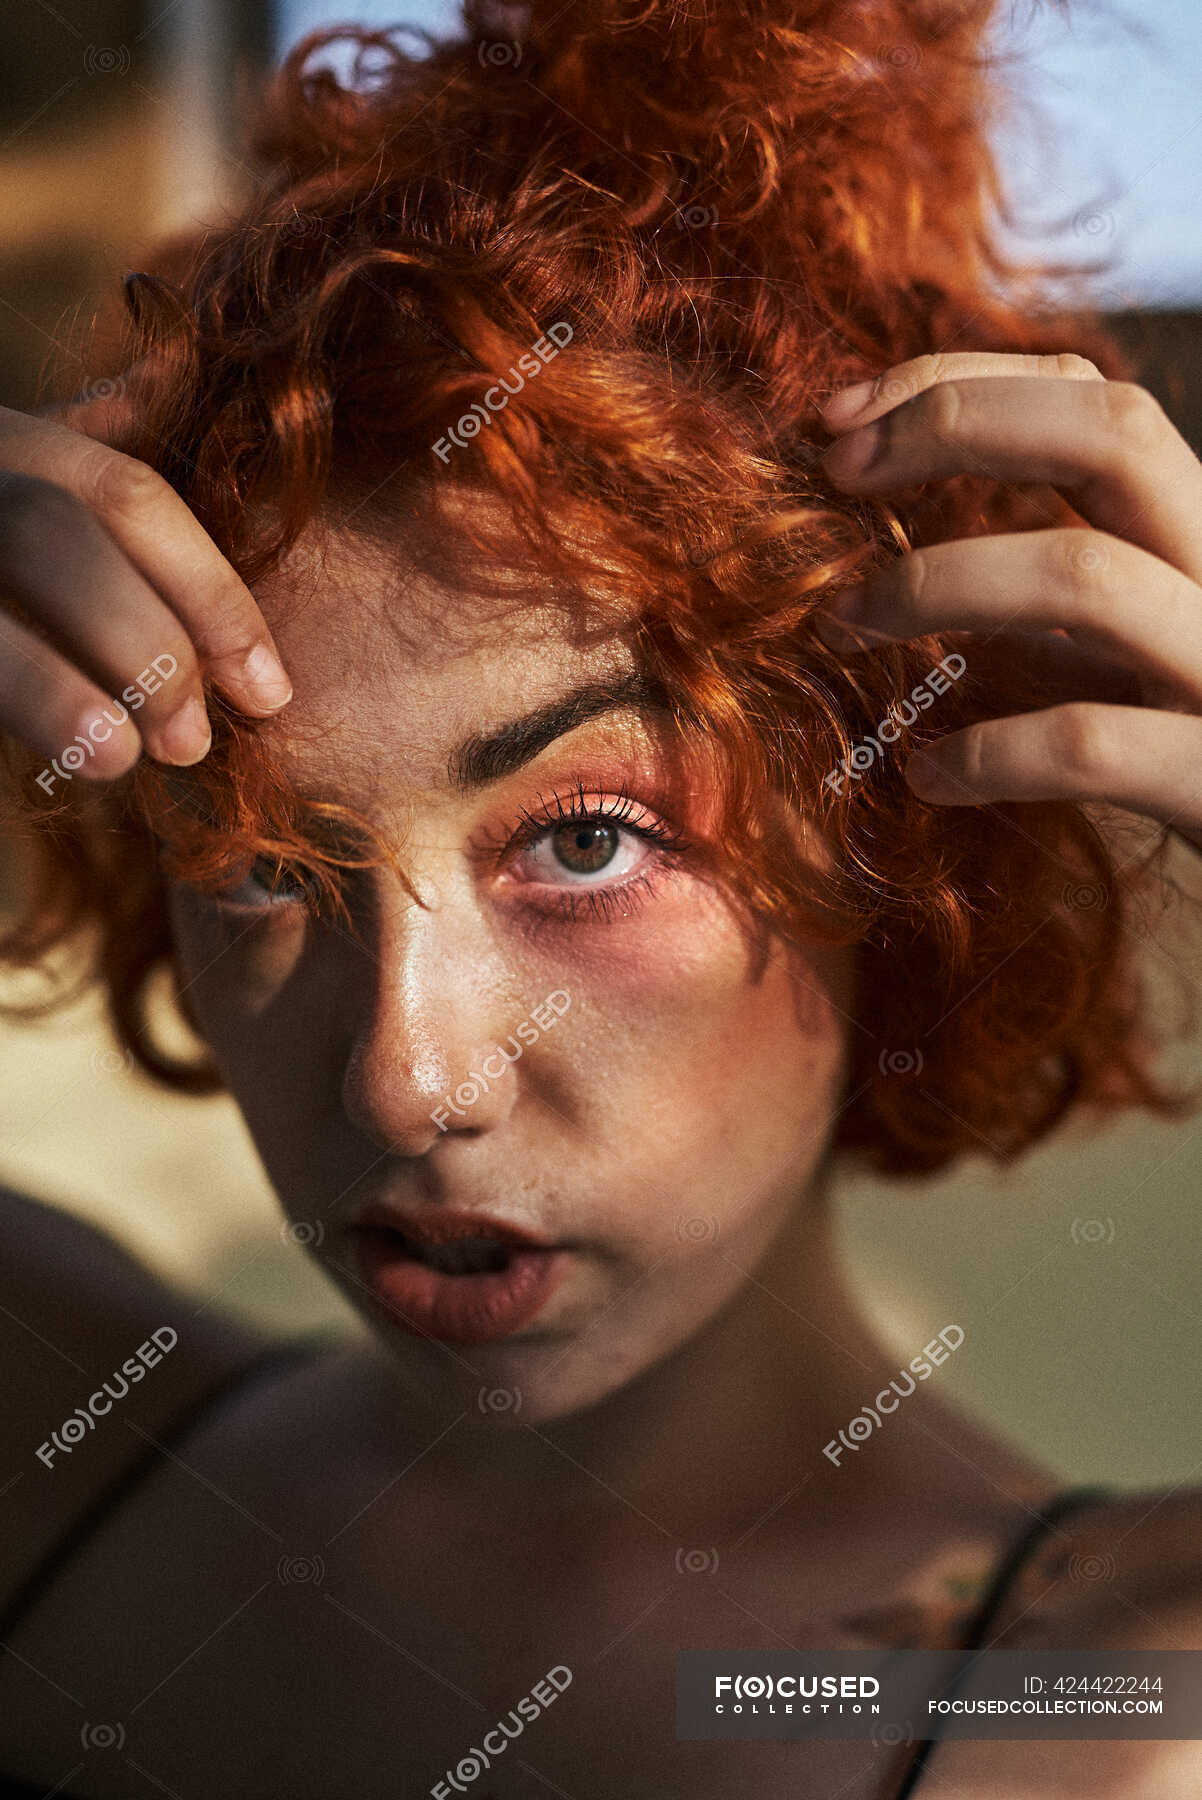 Young alternative redhead girl close up with green eyes — dyed hair, light  - Stock Photo | #424422244